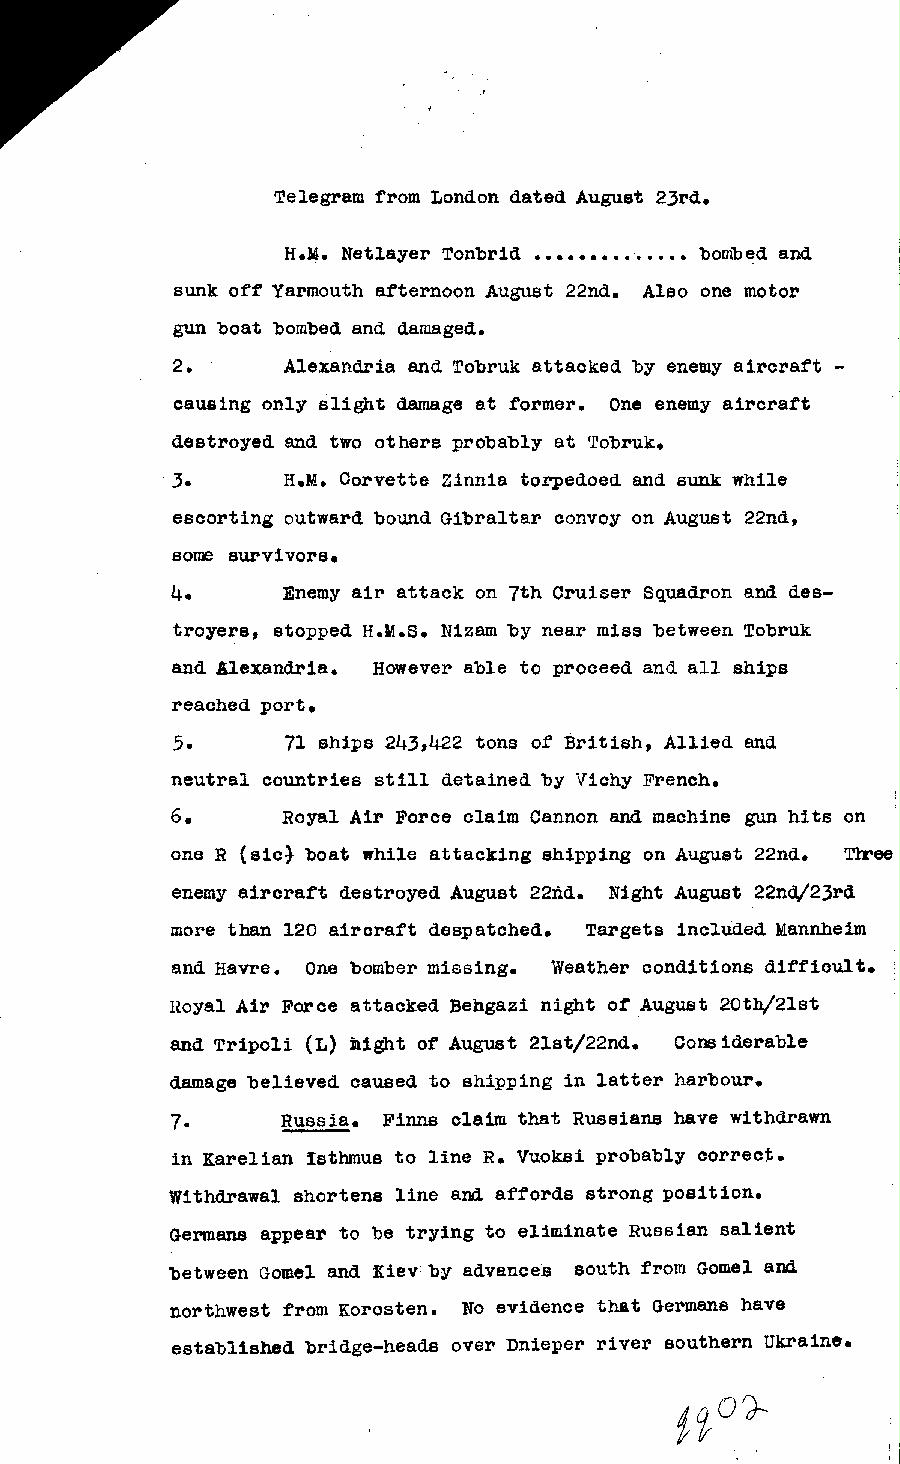 [a322qq02.jpg] - Report on military situation 8/23/41